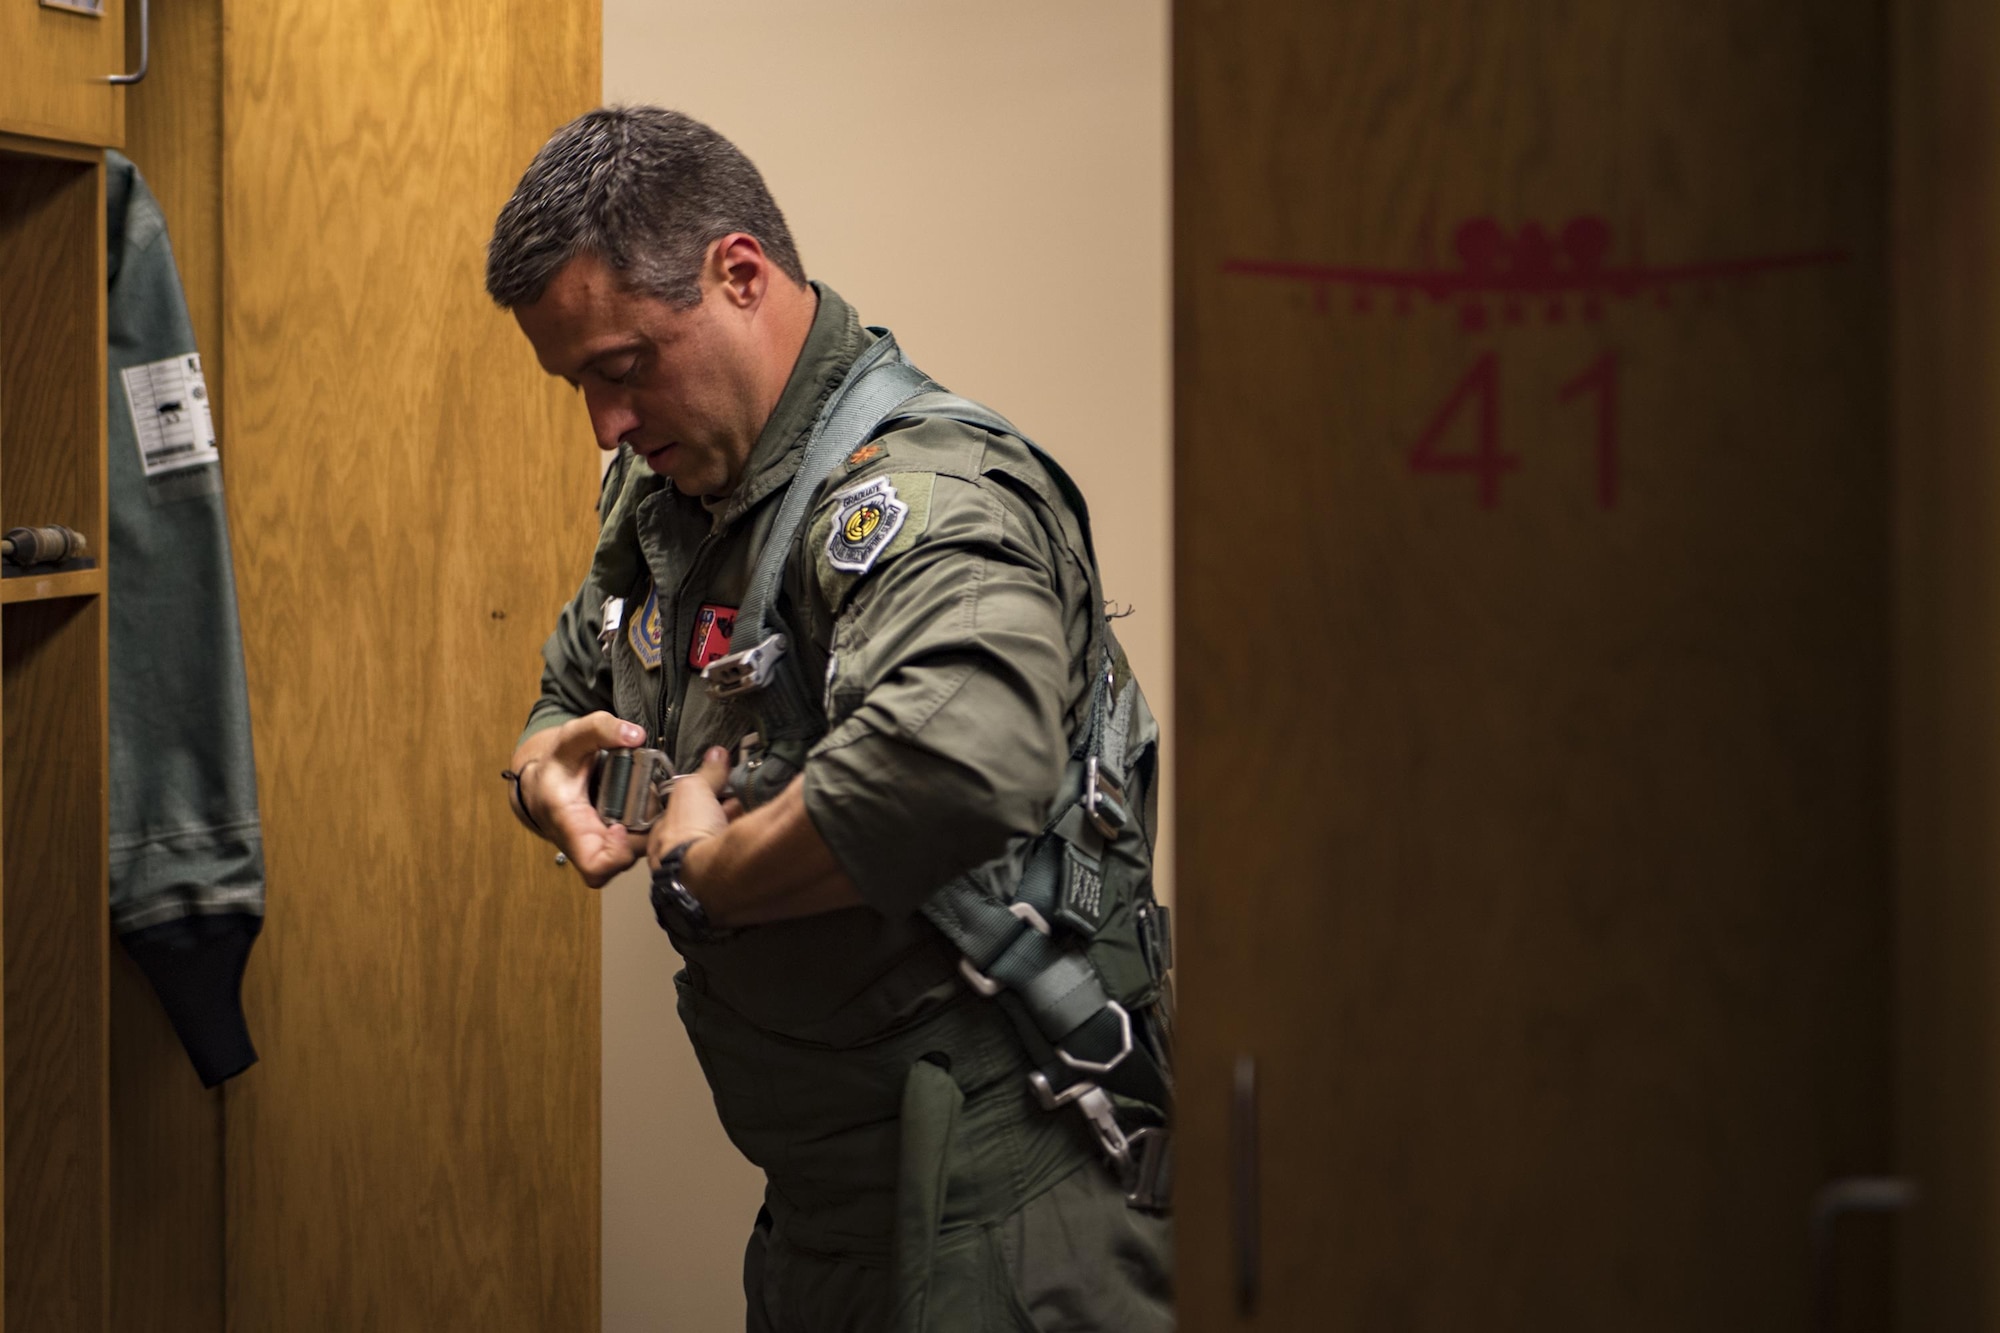 U.S. Air Force Maj. Matt Paetzhold, 76th Fighter Squadron A-10C Thunderbolt II instructor pilot dons equipment before flight, Sept. 9, 2017, at Moody Air Force Base, Ga. After graduating the Weapons Instructor Course, Paetzhold joined the Airmen who serve as tactical and operational advisors to military leaders at all levels. Due to the relationship between the 75th FS and 76th FS, Paetzhold is slated to deploy as the 75th FSs weapons officer. (U.S. Air Force photo by Senior Airman Daniel Snider)